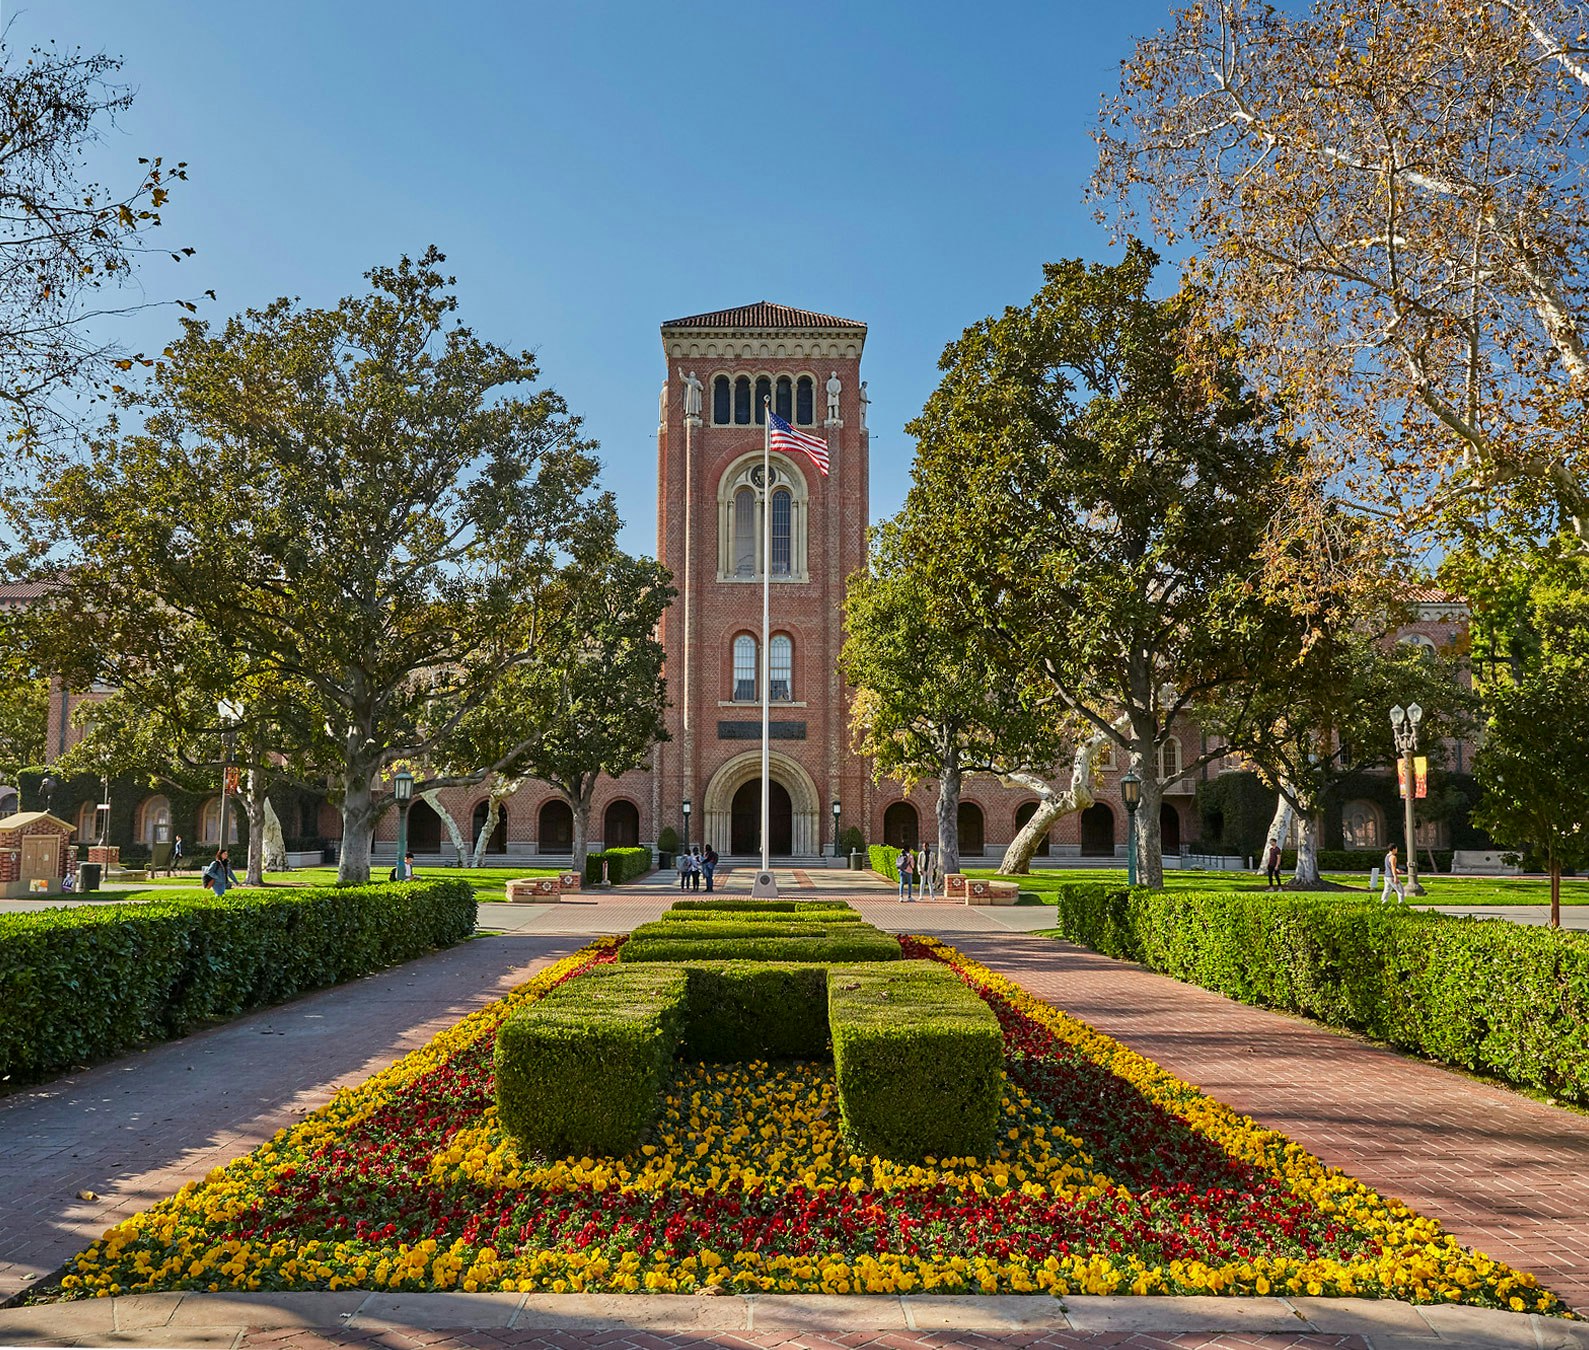 university of southern california essay examples